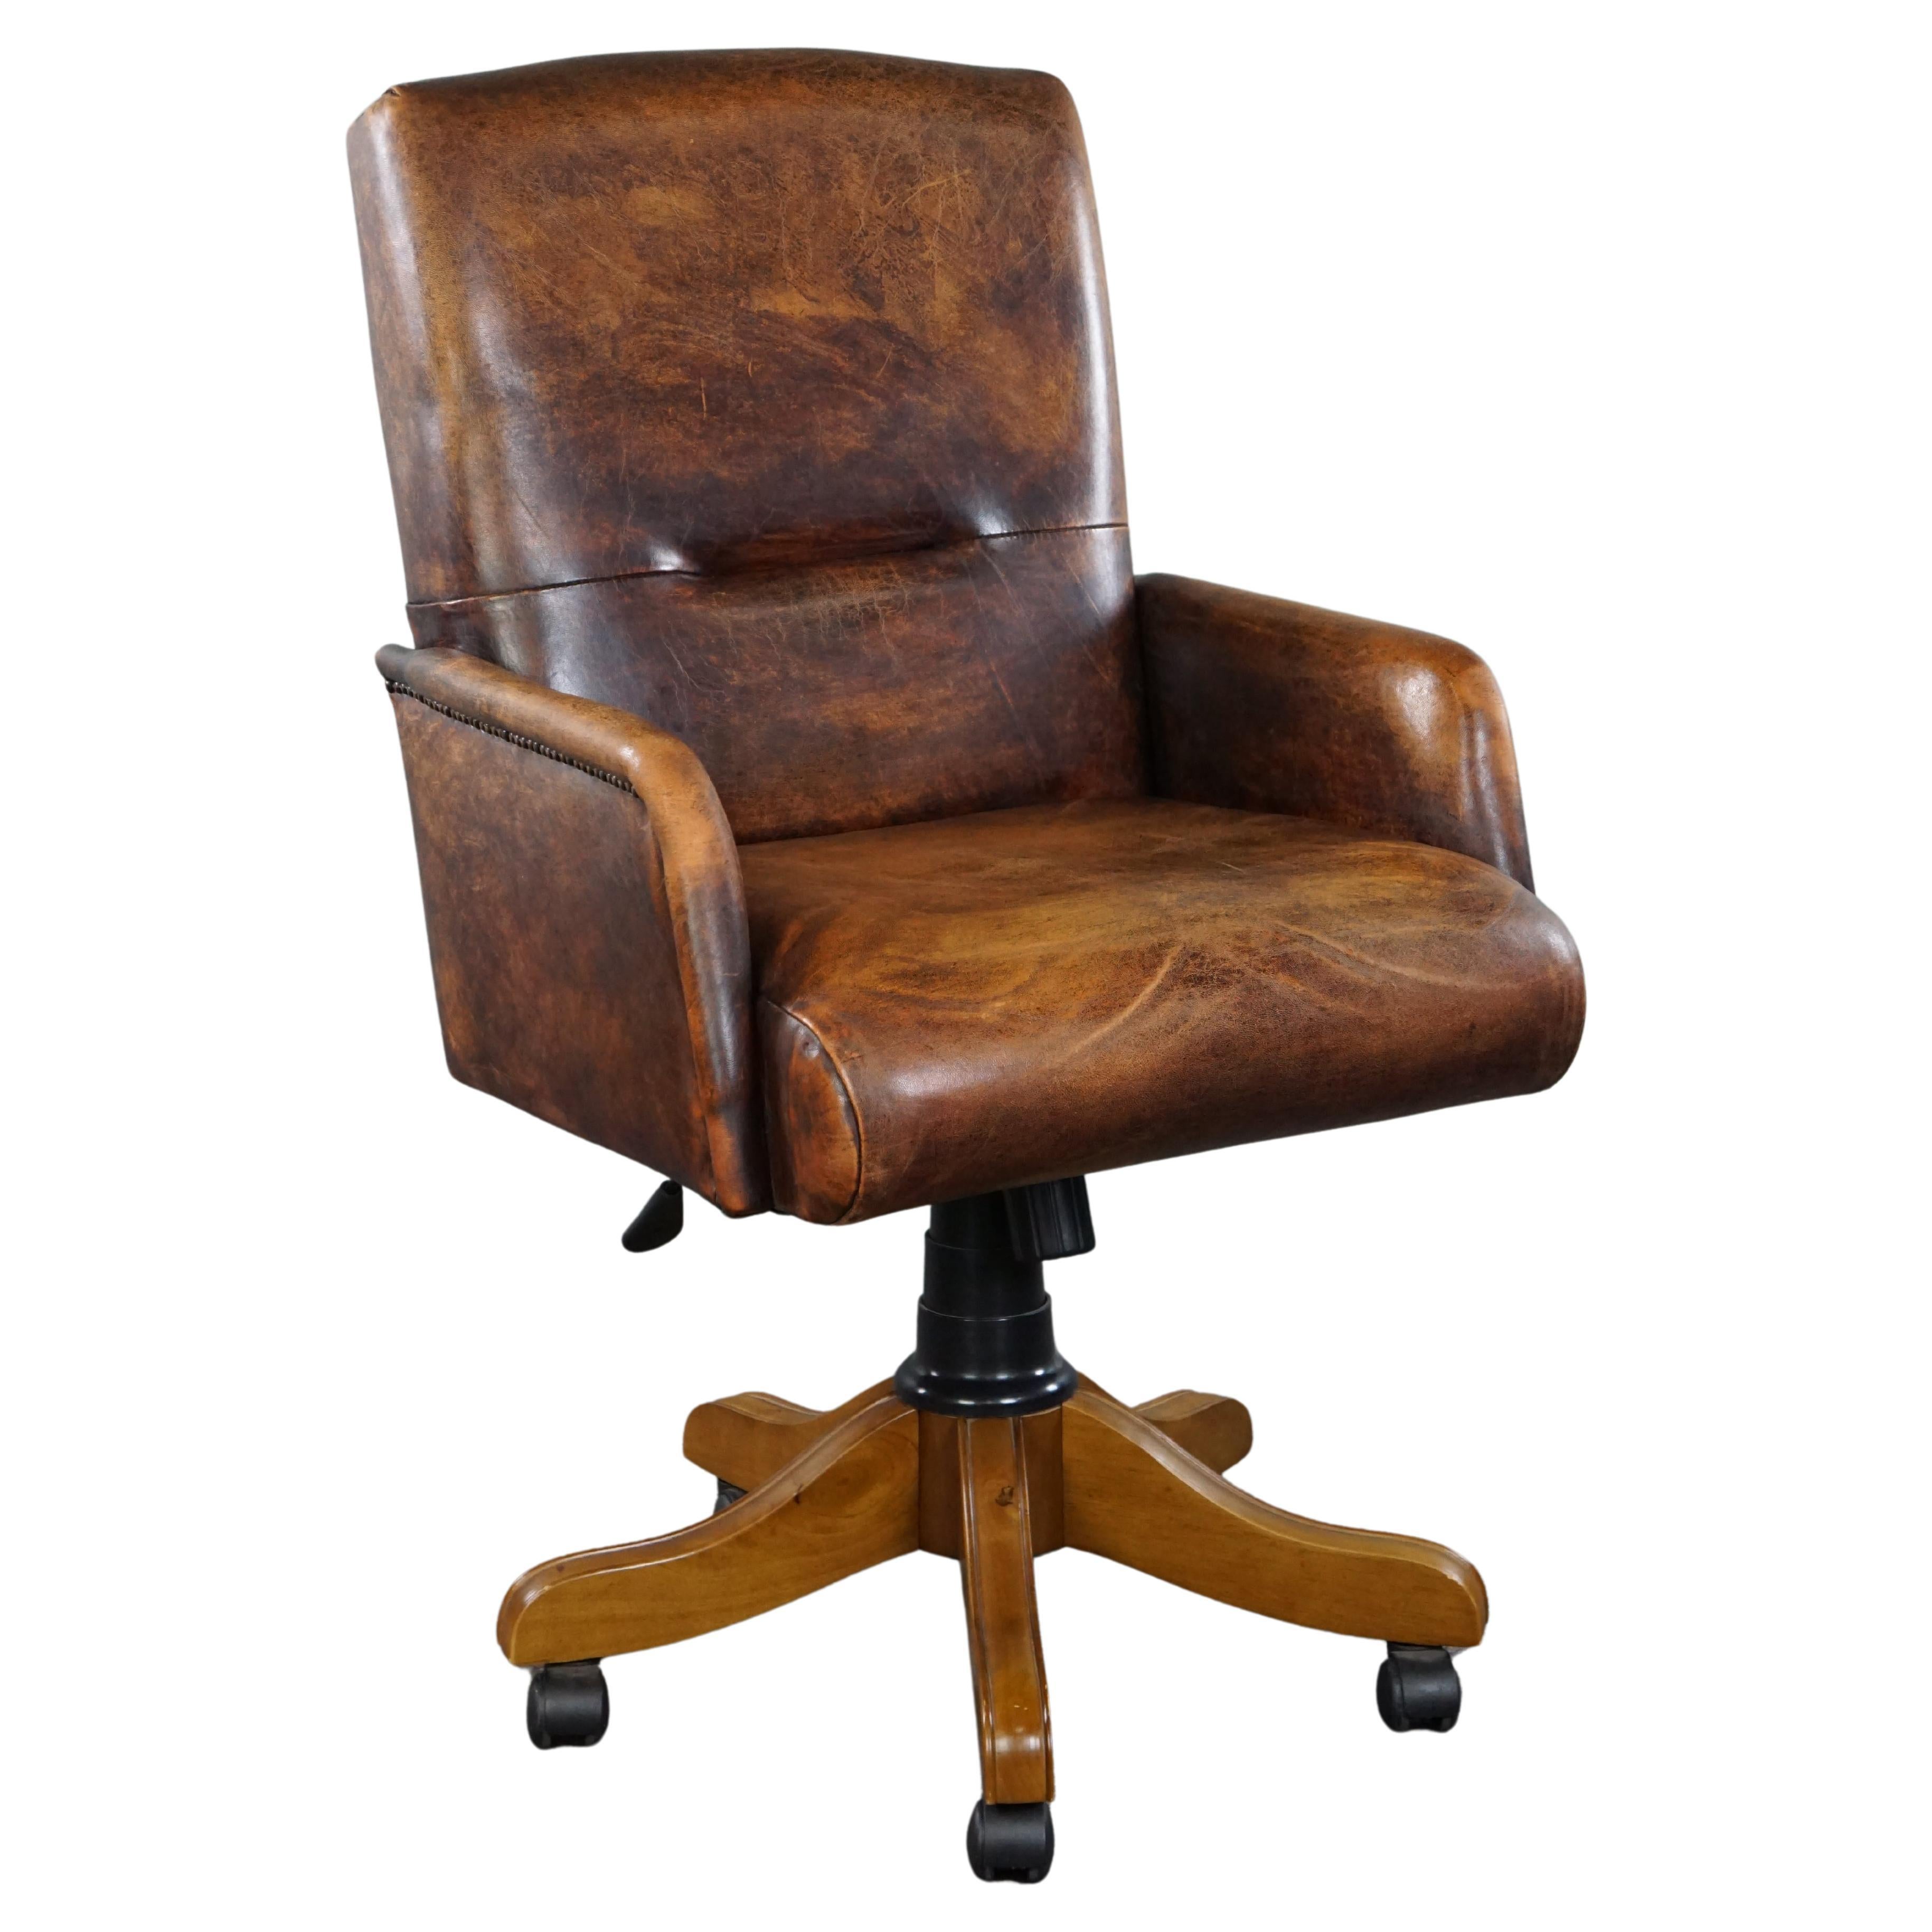 Adjustable sheepskin leather office chair in good condition, English style For Sale